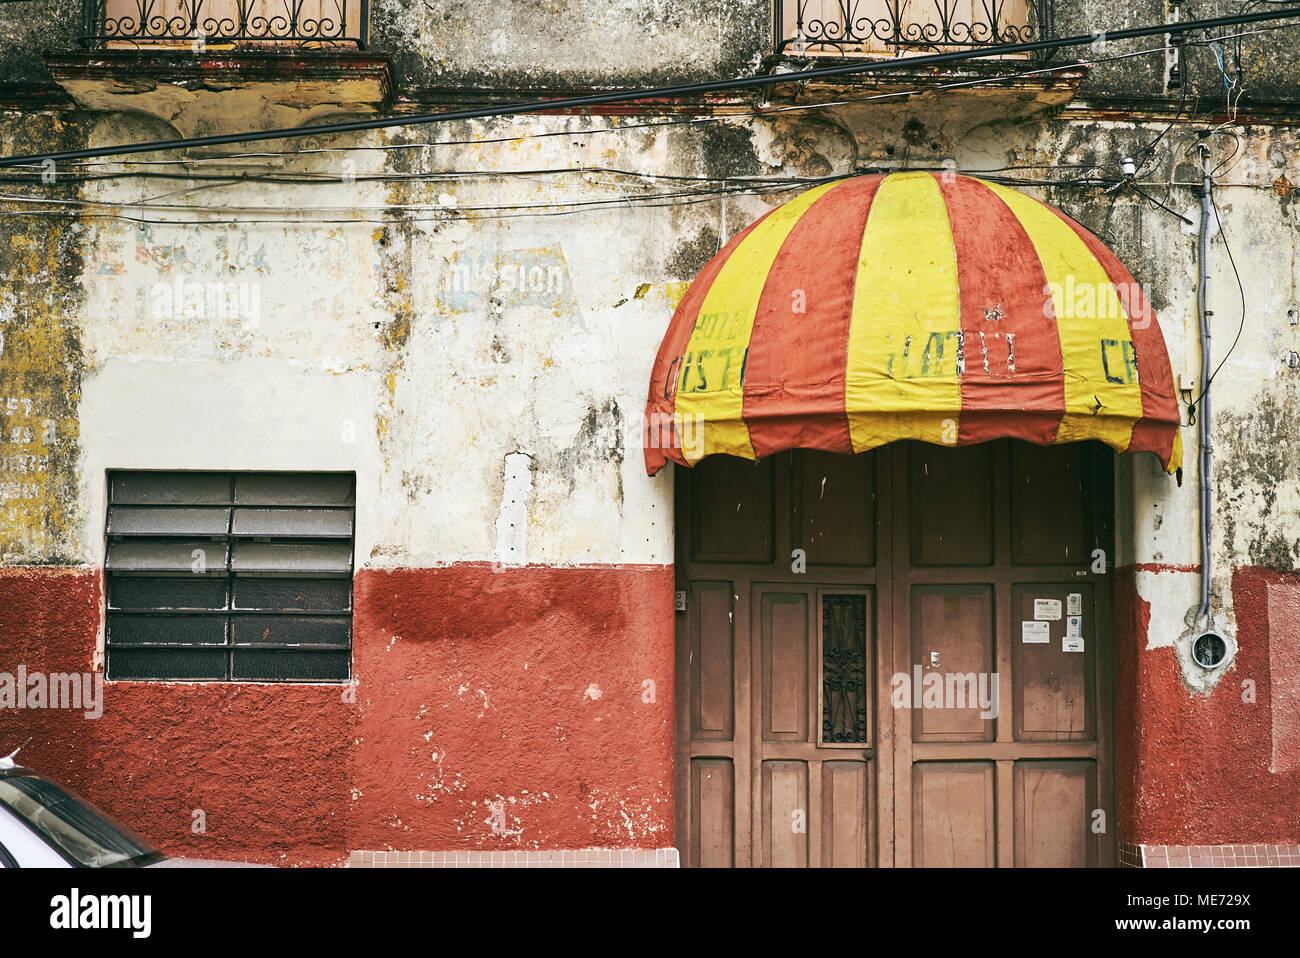 The Vintage Awning In Red And Yellow Mounted On The Front Door Of